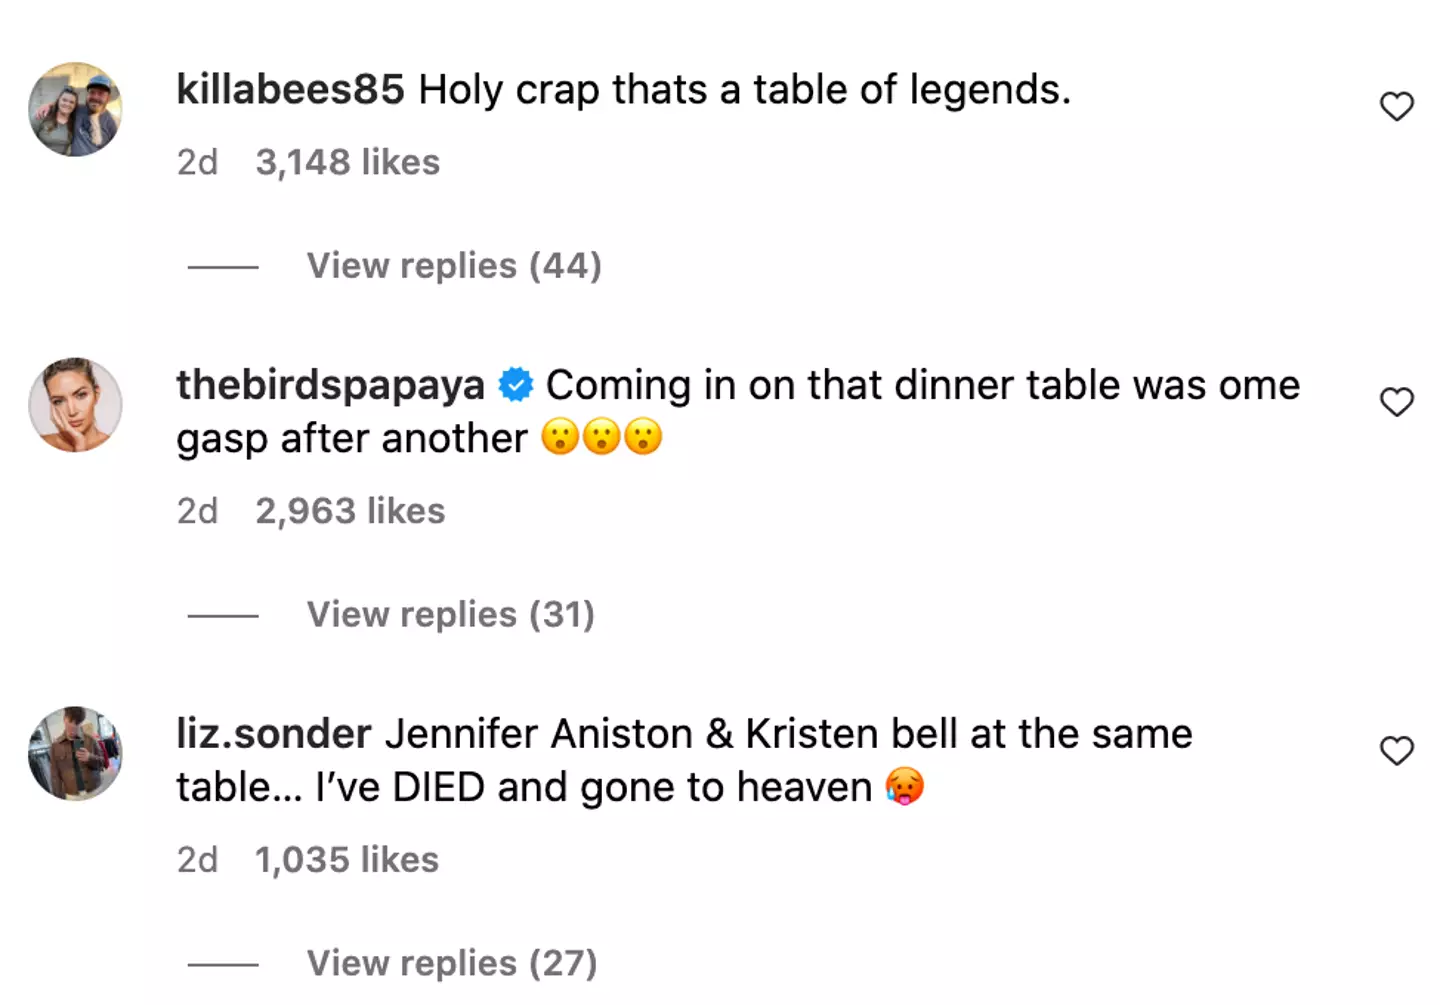 People are calling the dinner party a 'table of legends'.